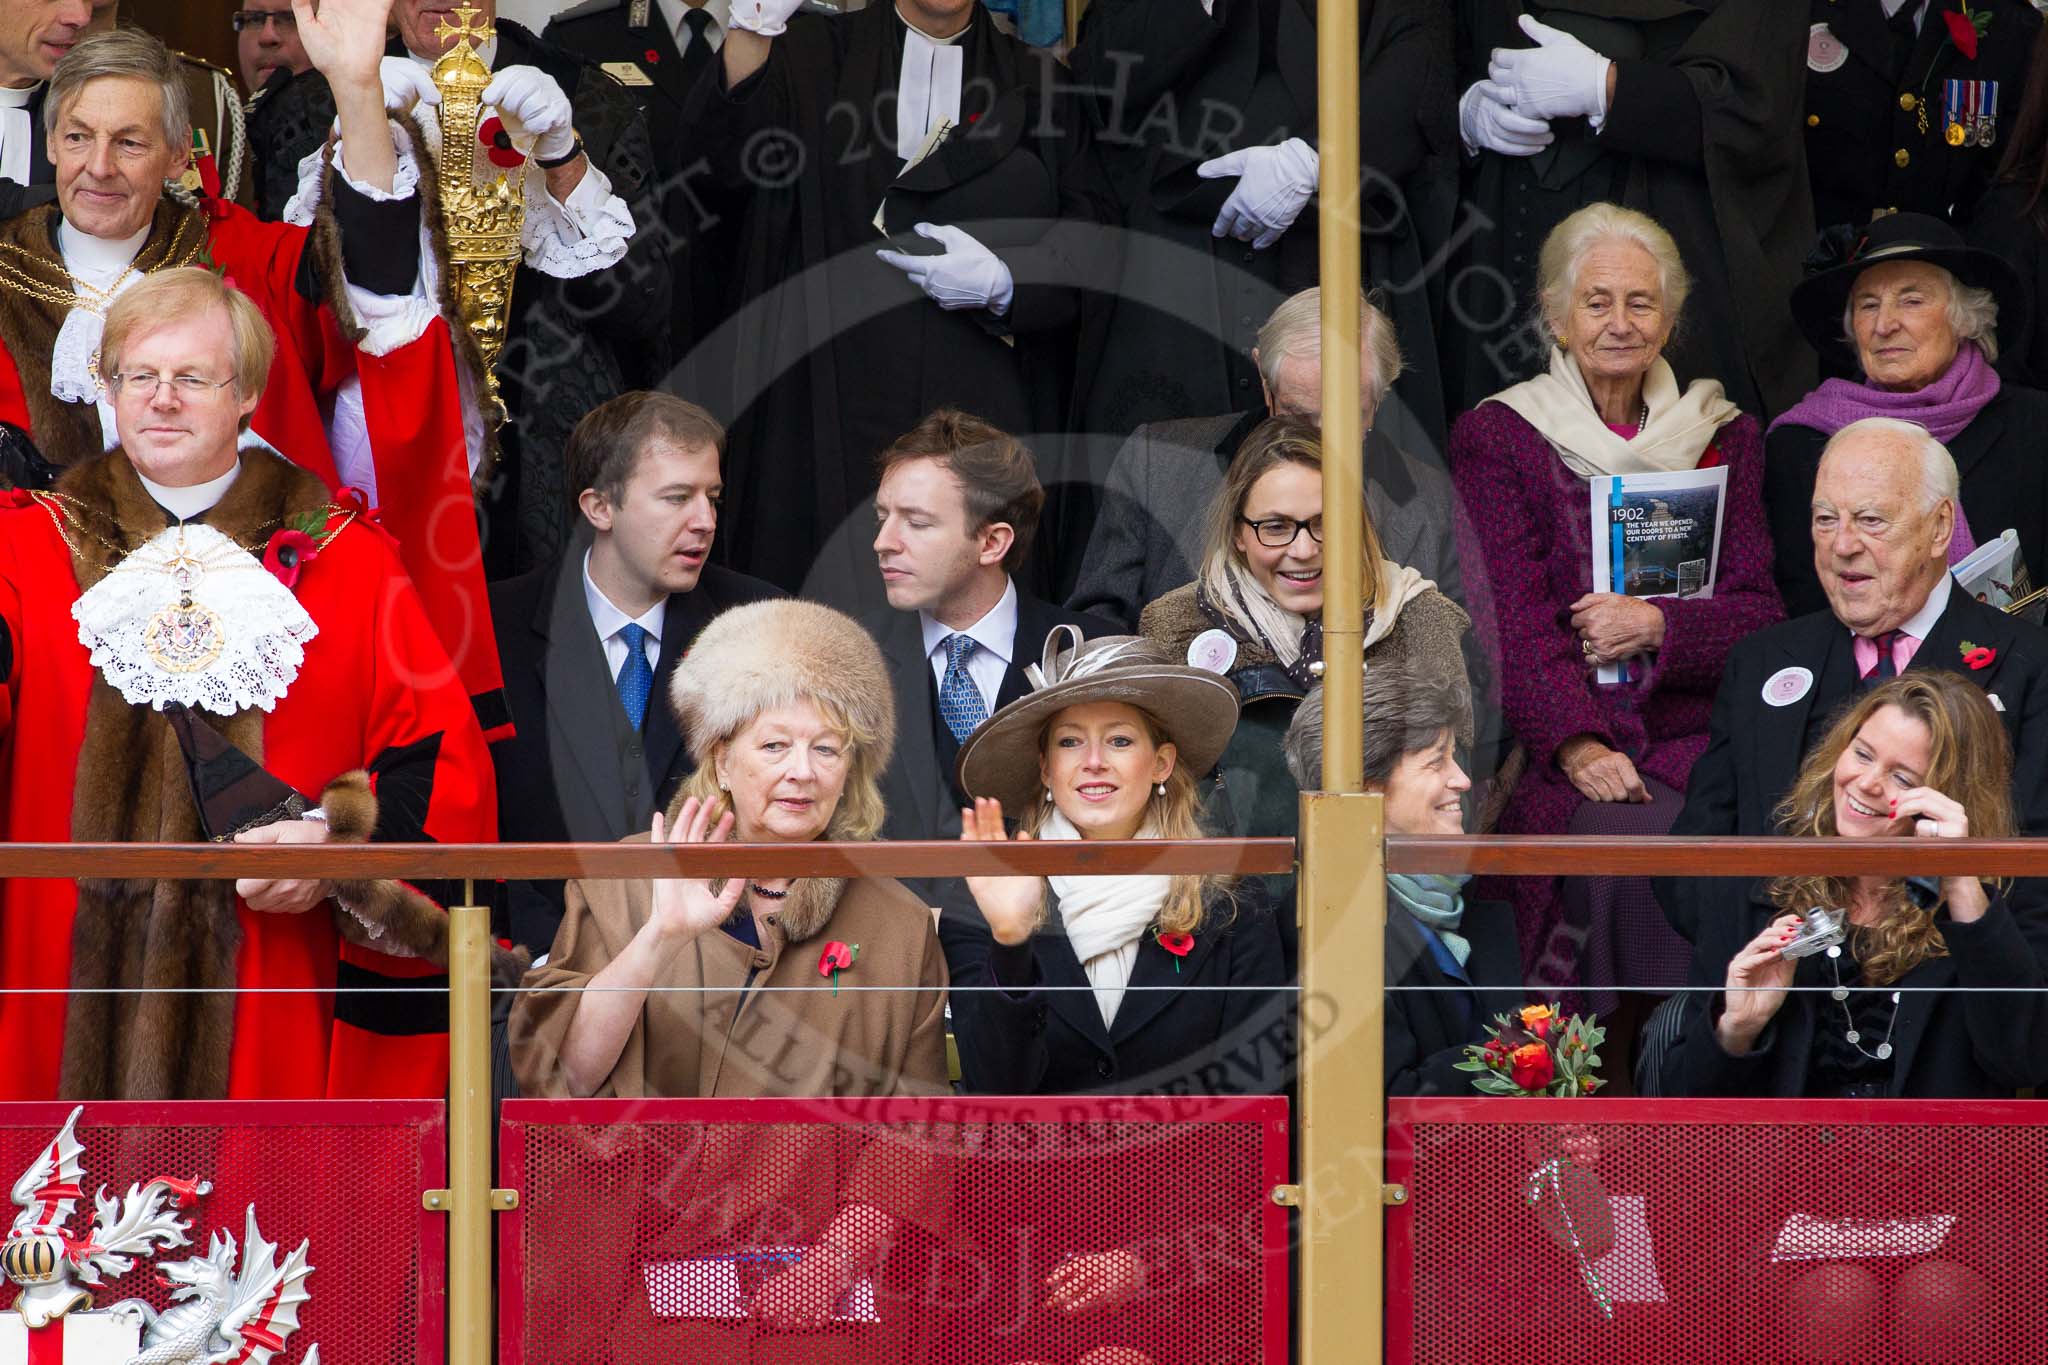 Lord Mayor's Show 2012: The outgoing Lord Mayor, David Wootton, the outgoing Lady Mayoress, Liz Wootton, Sophie Wootton, and James and Christopher Wootton behind..
Press stand opposite Mansion House, City of London,
London,
Greater London,
United Kingdom,
on 10 November 2012 at 11:06, image #295